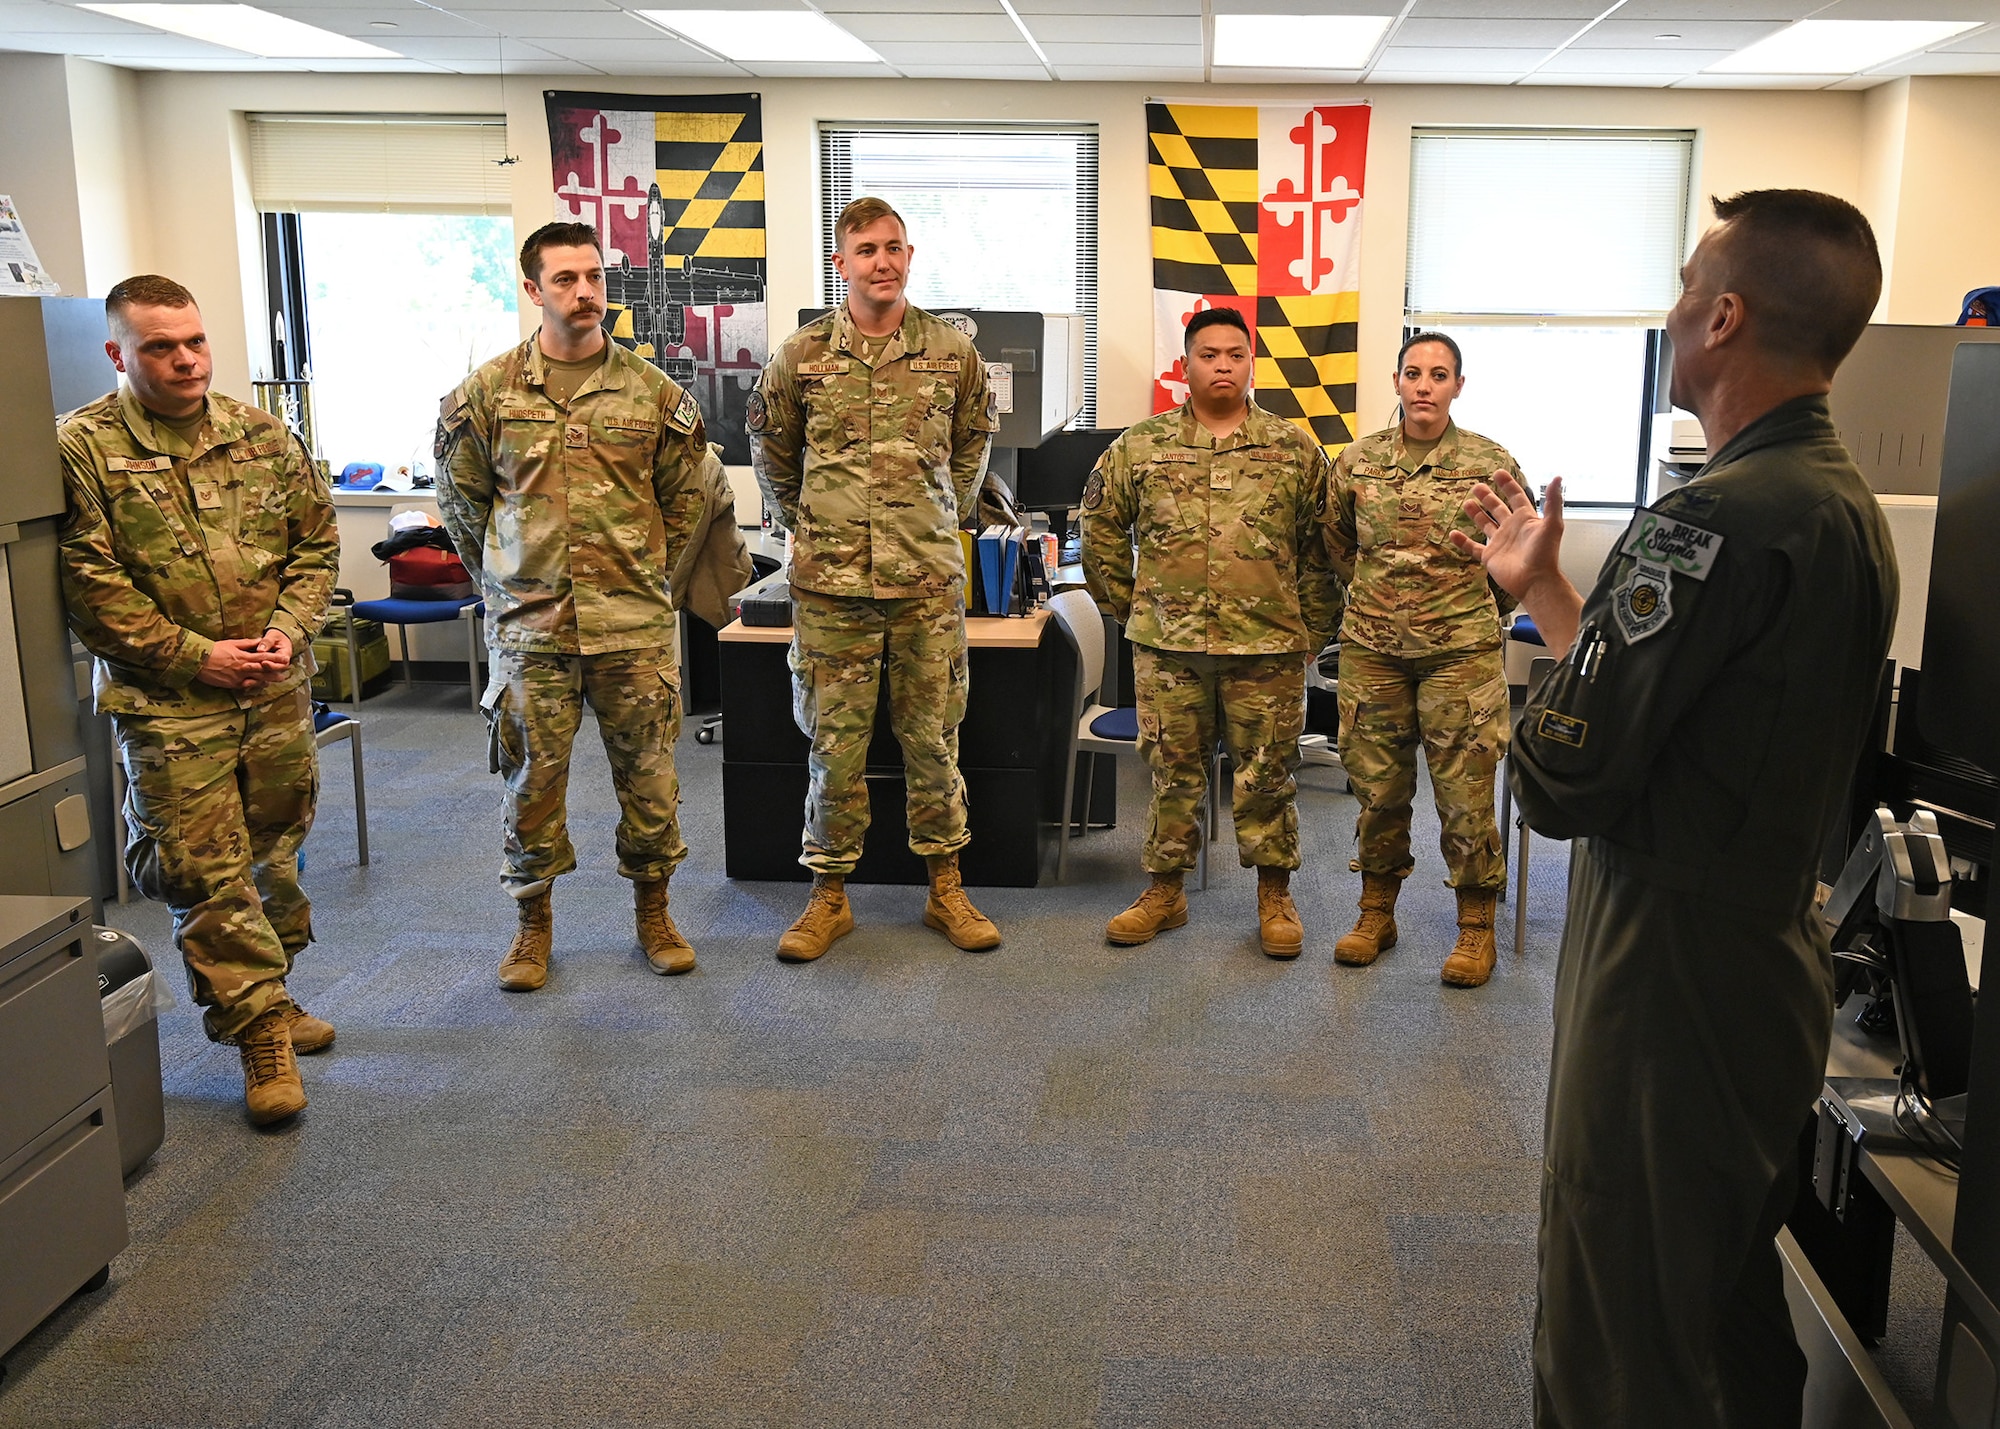 U.S. Air Force Col. Richard Hunt, 175th Wing vice commander, congratulates members of the 175th Wing recruiting team at Martin State Air National Guard Base, Middle River, Md., May 6, 2023, after they received the Air Force Recruiting Service Top III Chief Master Sgt. Brad W. Esposito Team Leadership Award for their accomplishments in the first quarter of fiscal year 2023.